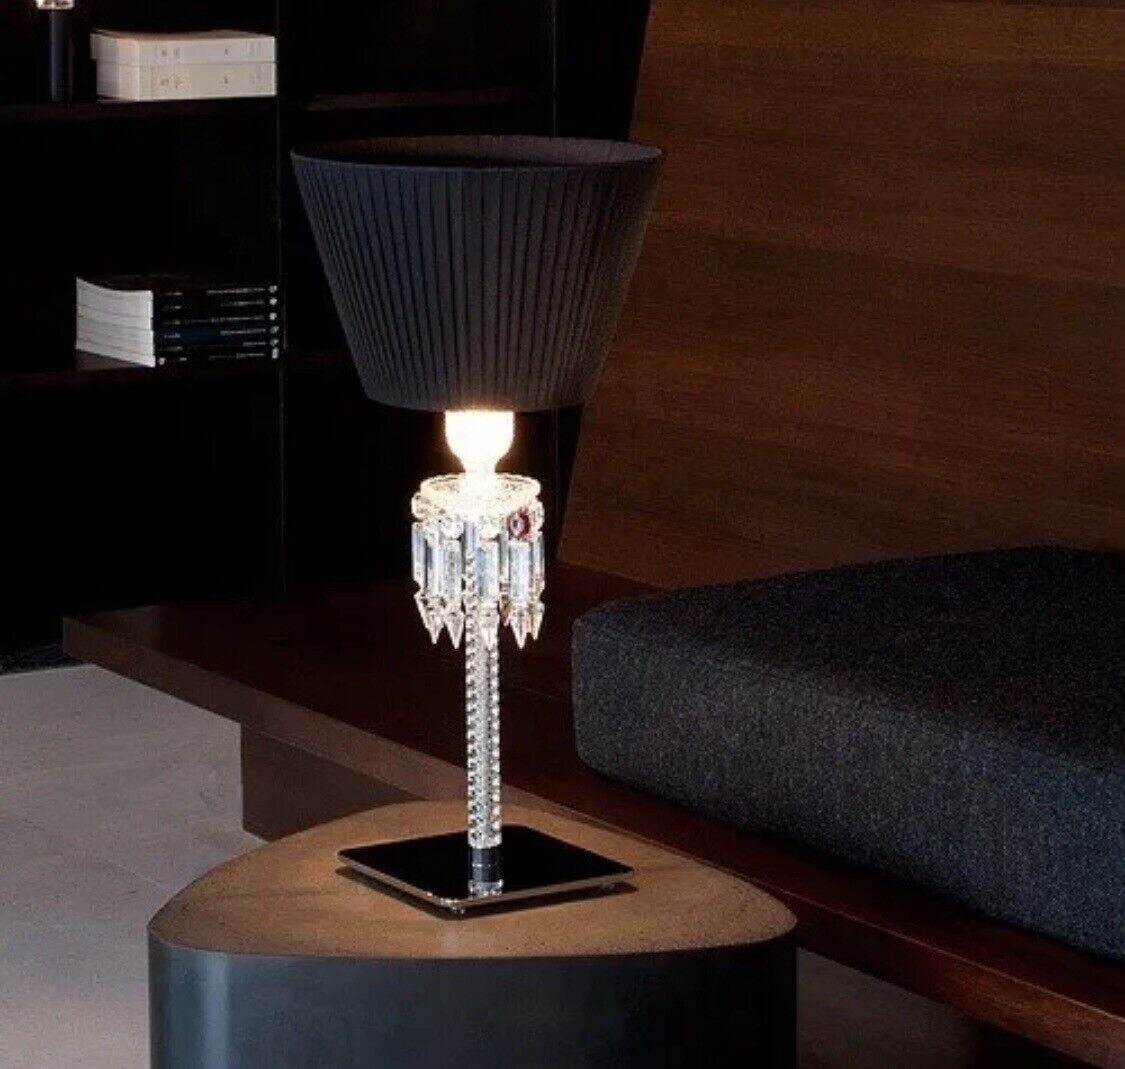 Baccarat Torch Crystal Table Lamp & Black Lampshade Arik Levy REF: 2603386 *NEW* - Image 2 of 4